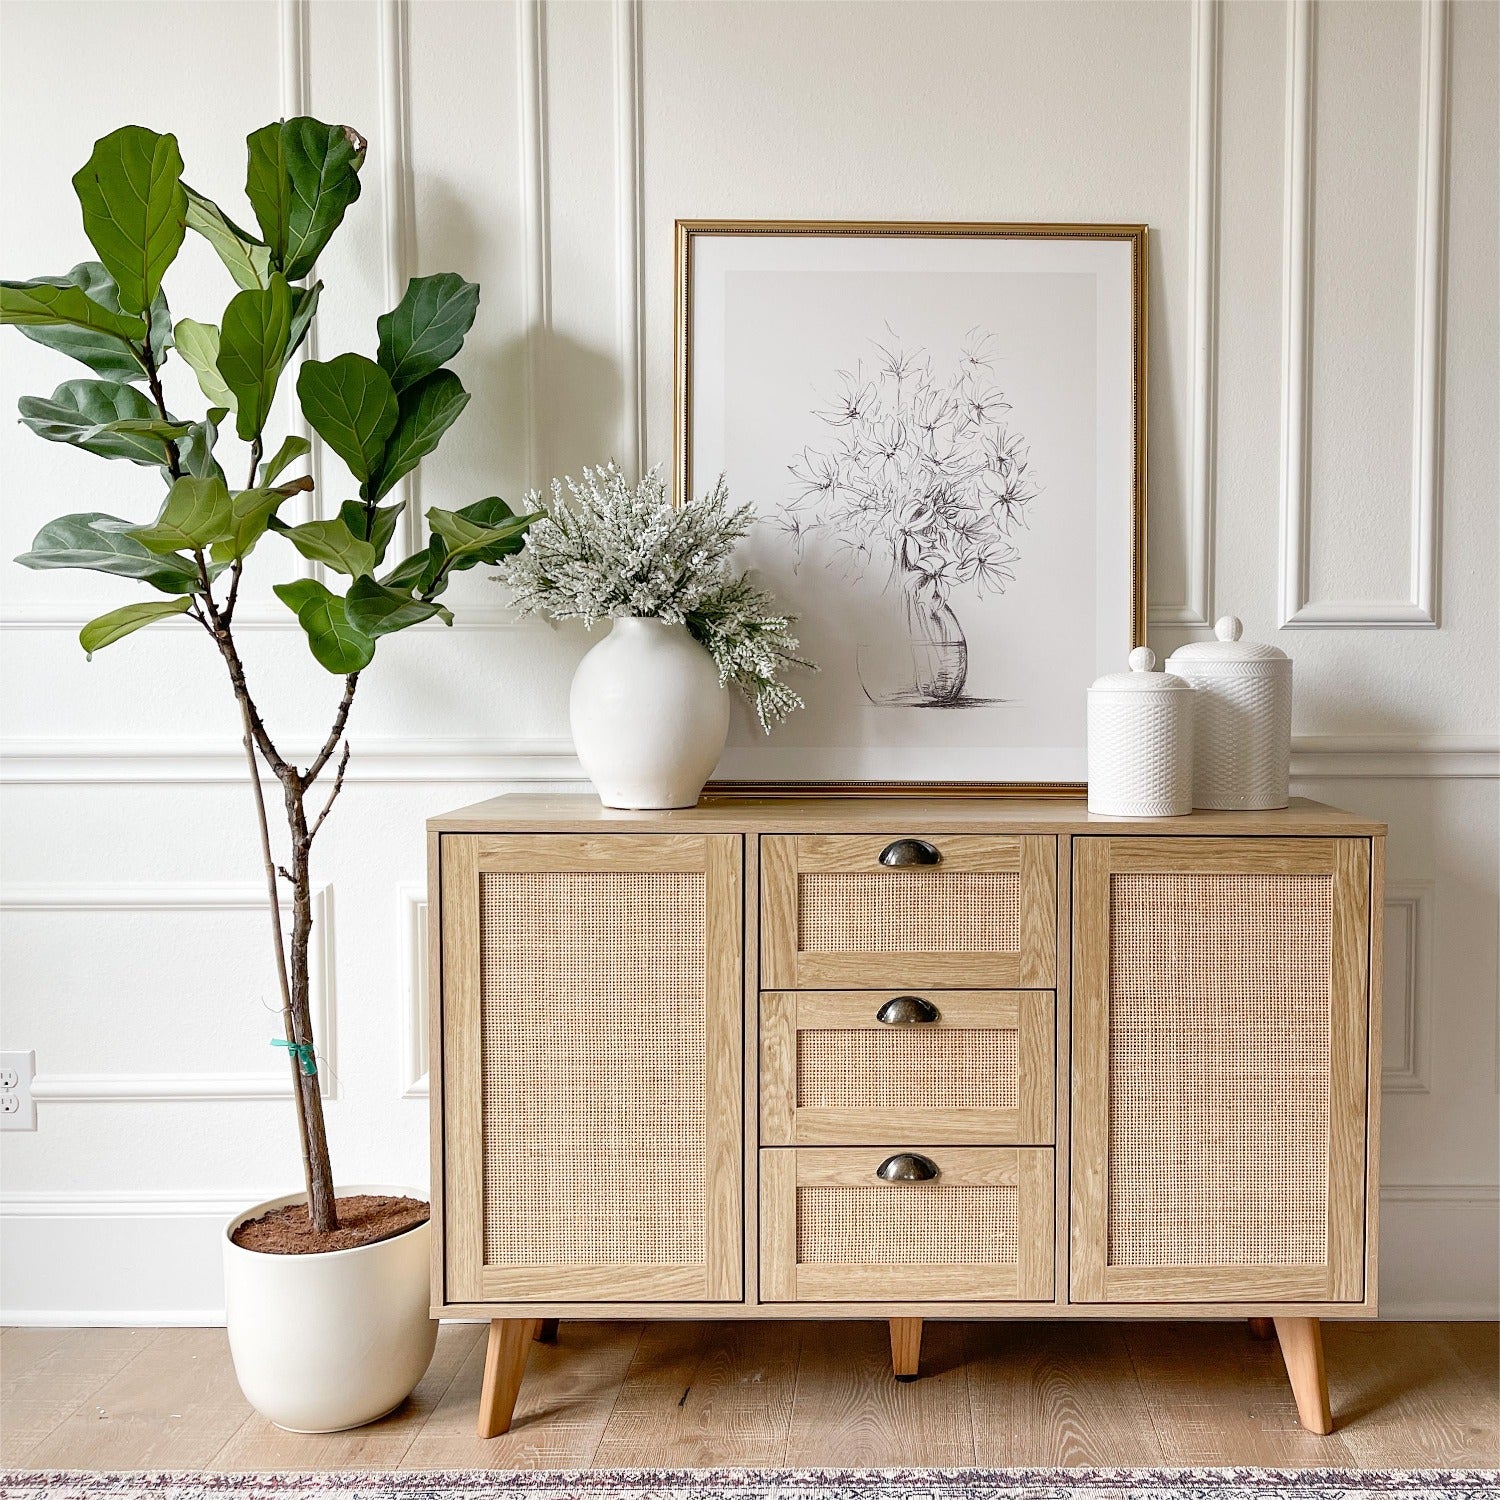 Stylish Storage Solutions: Cabinets & Chests